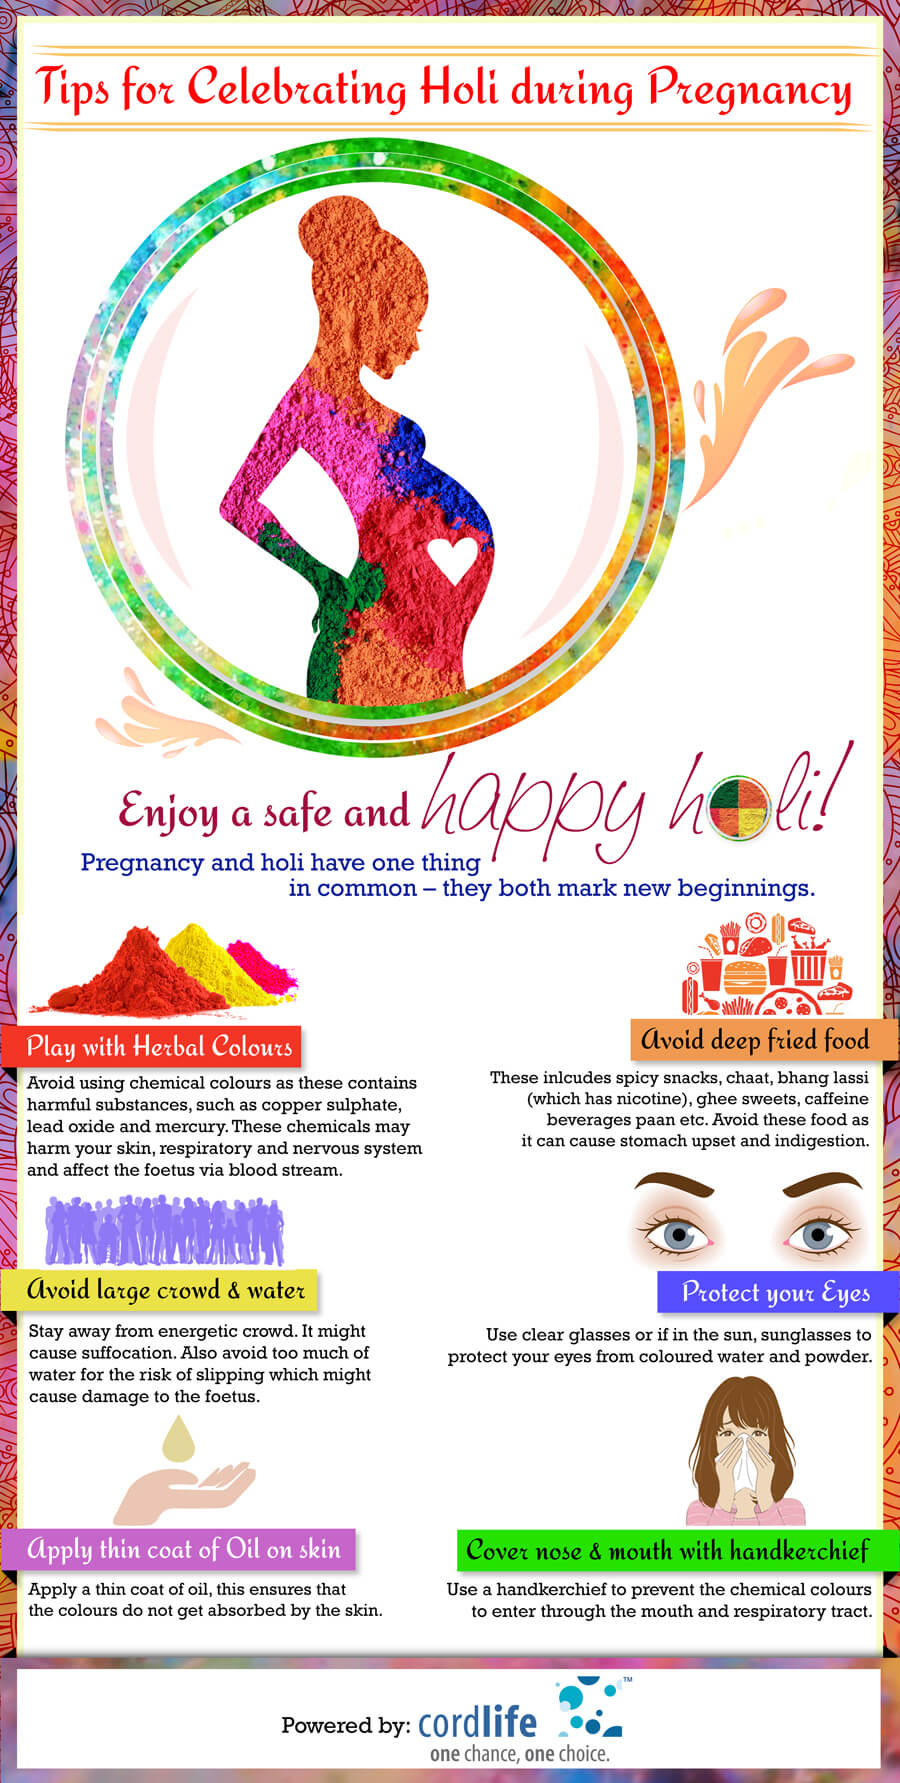 Tips for pregnant woman on Holi